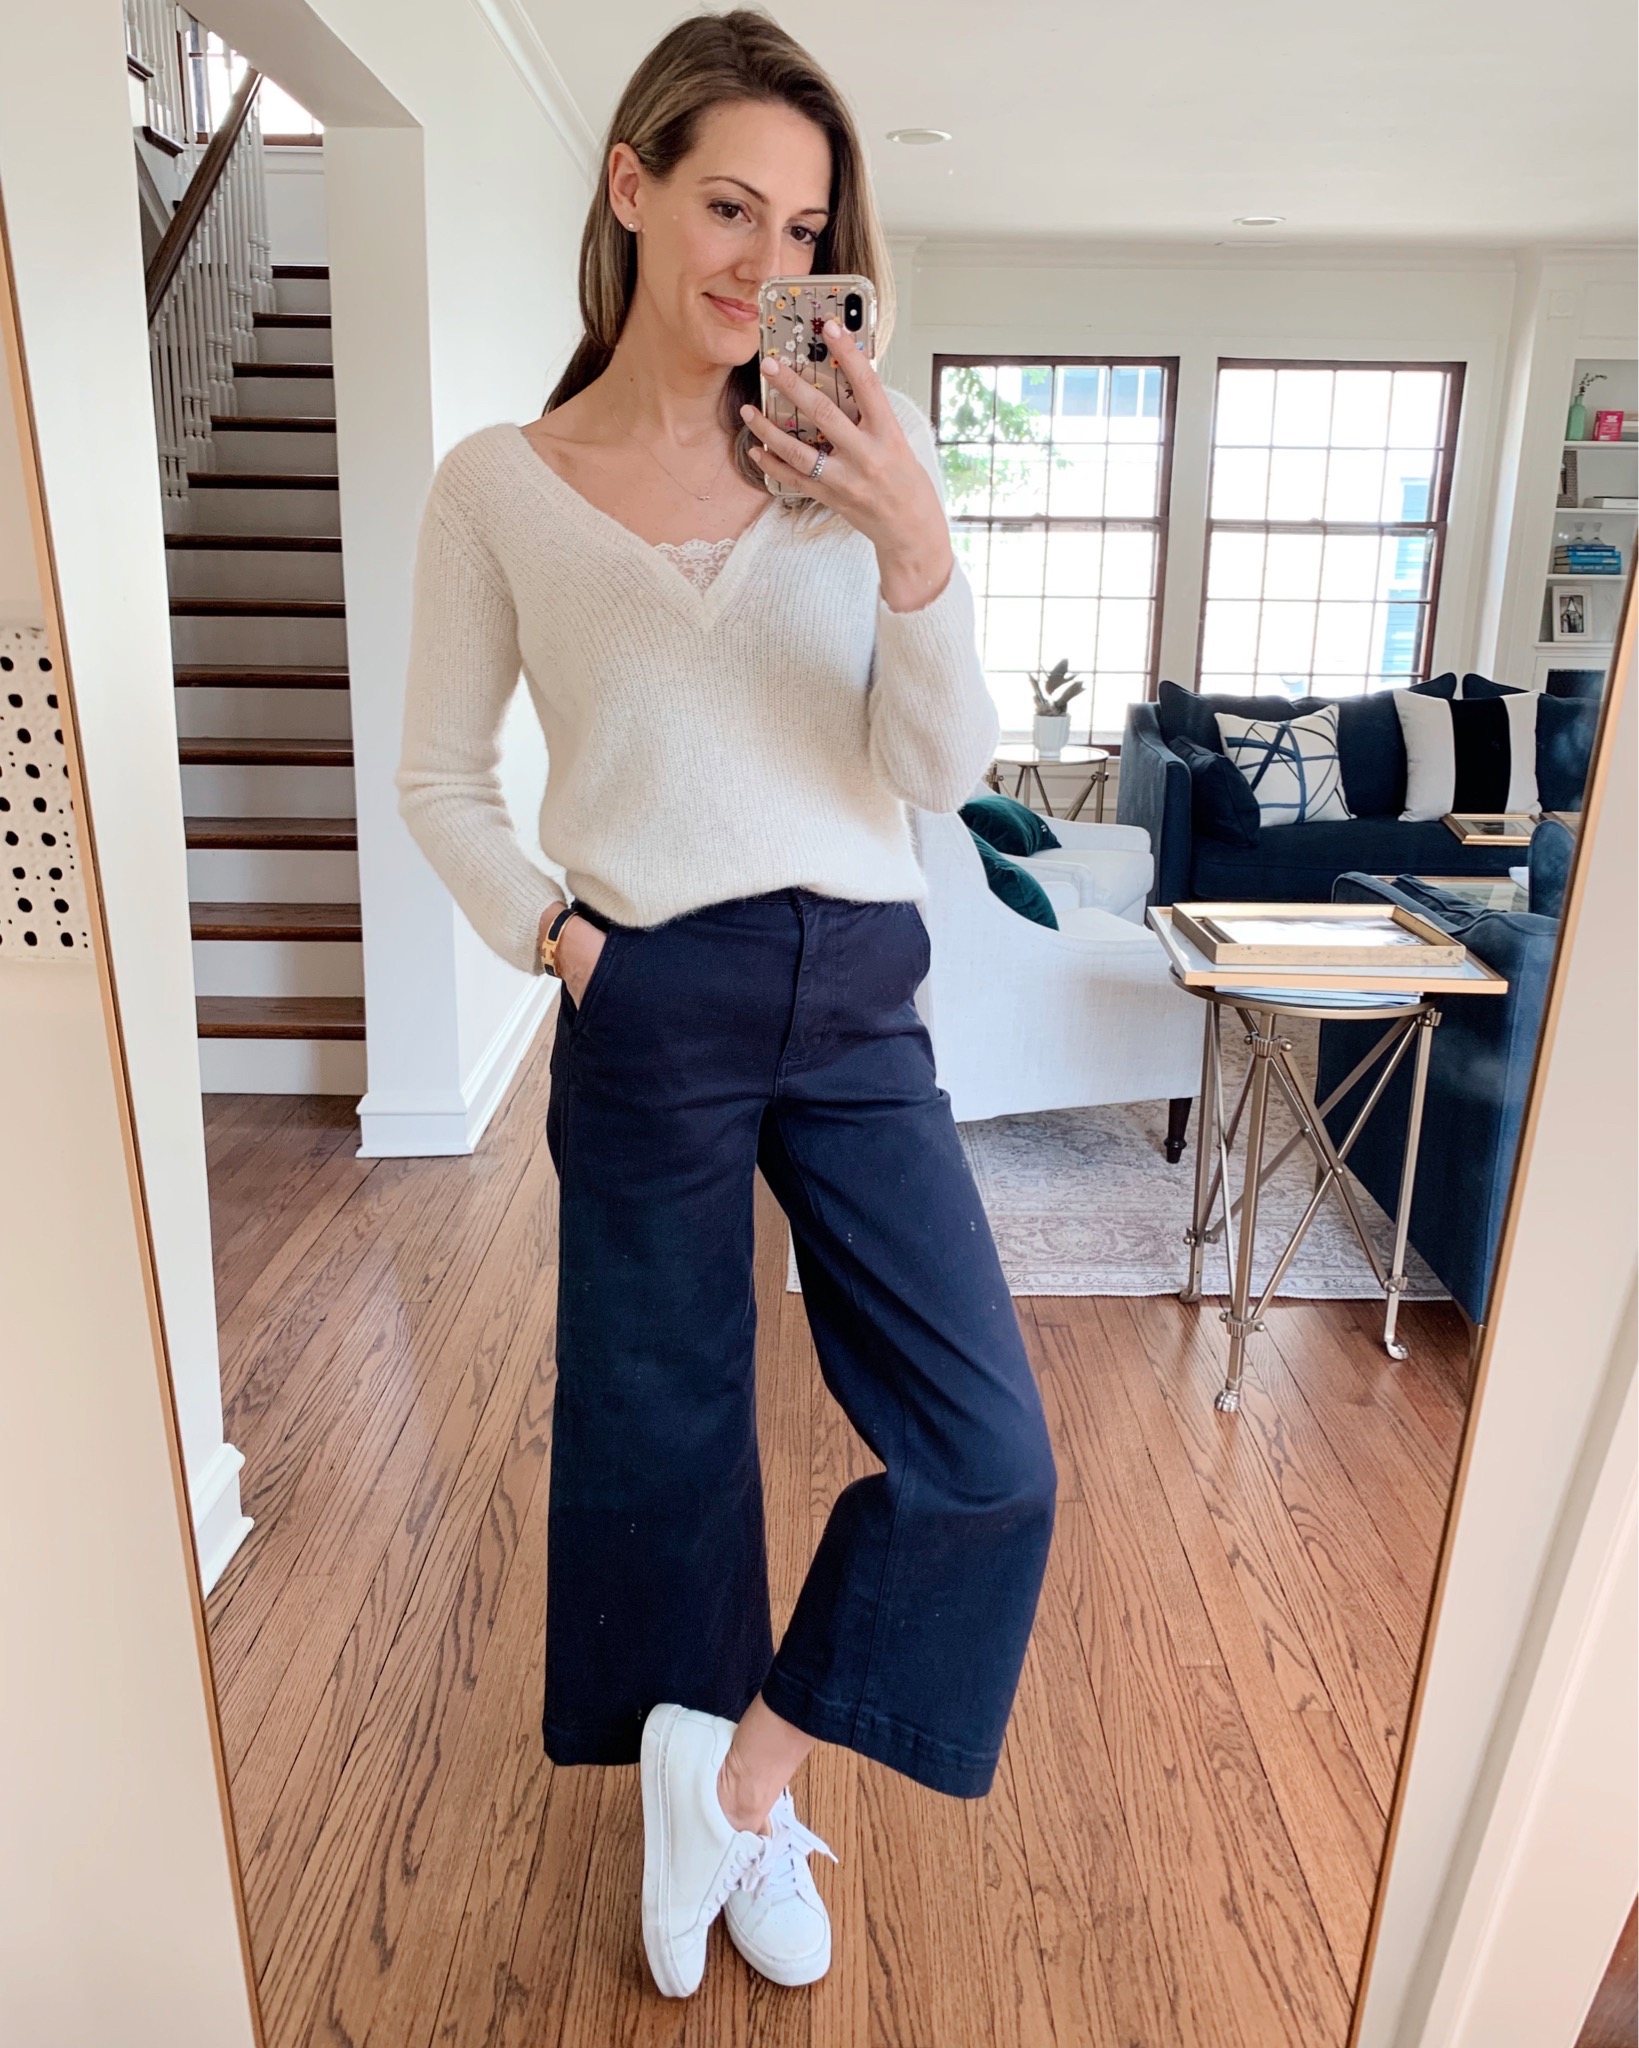 how to style white sneakers with jeans skirts everyday - See (Anna) Jane.